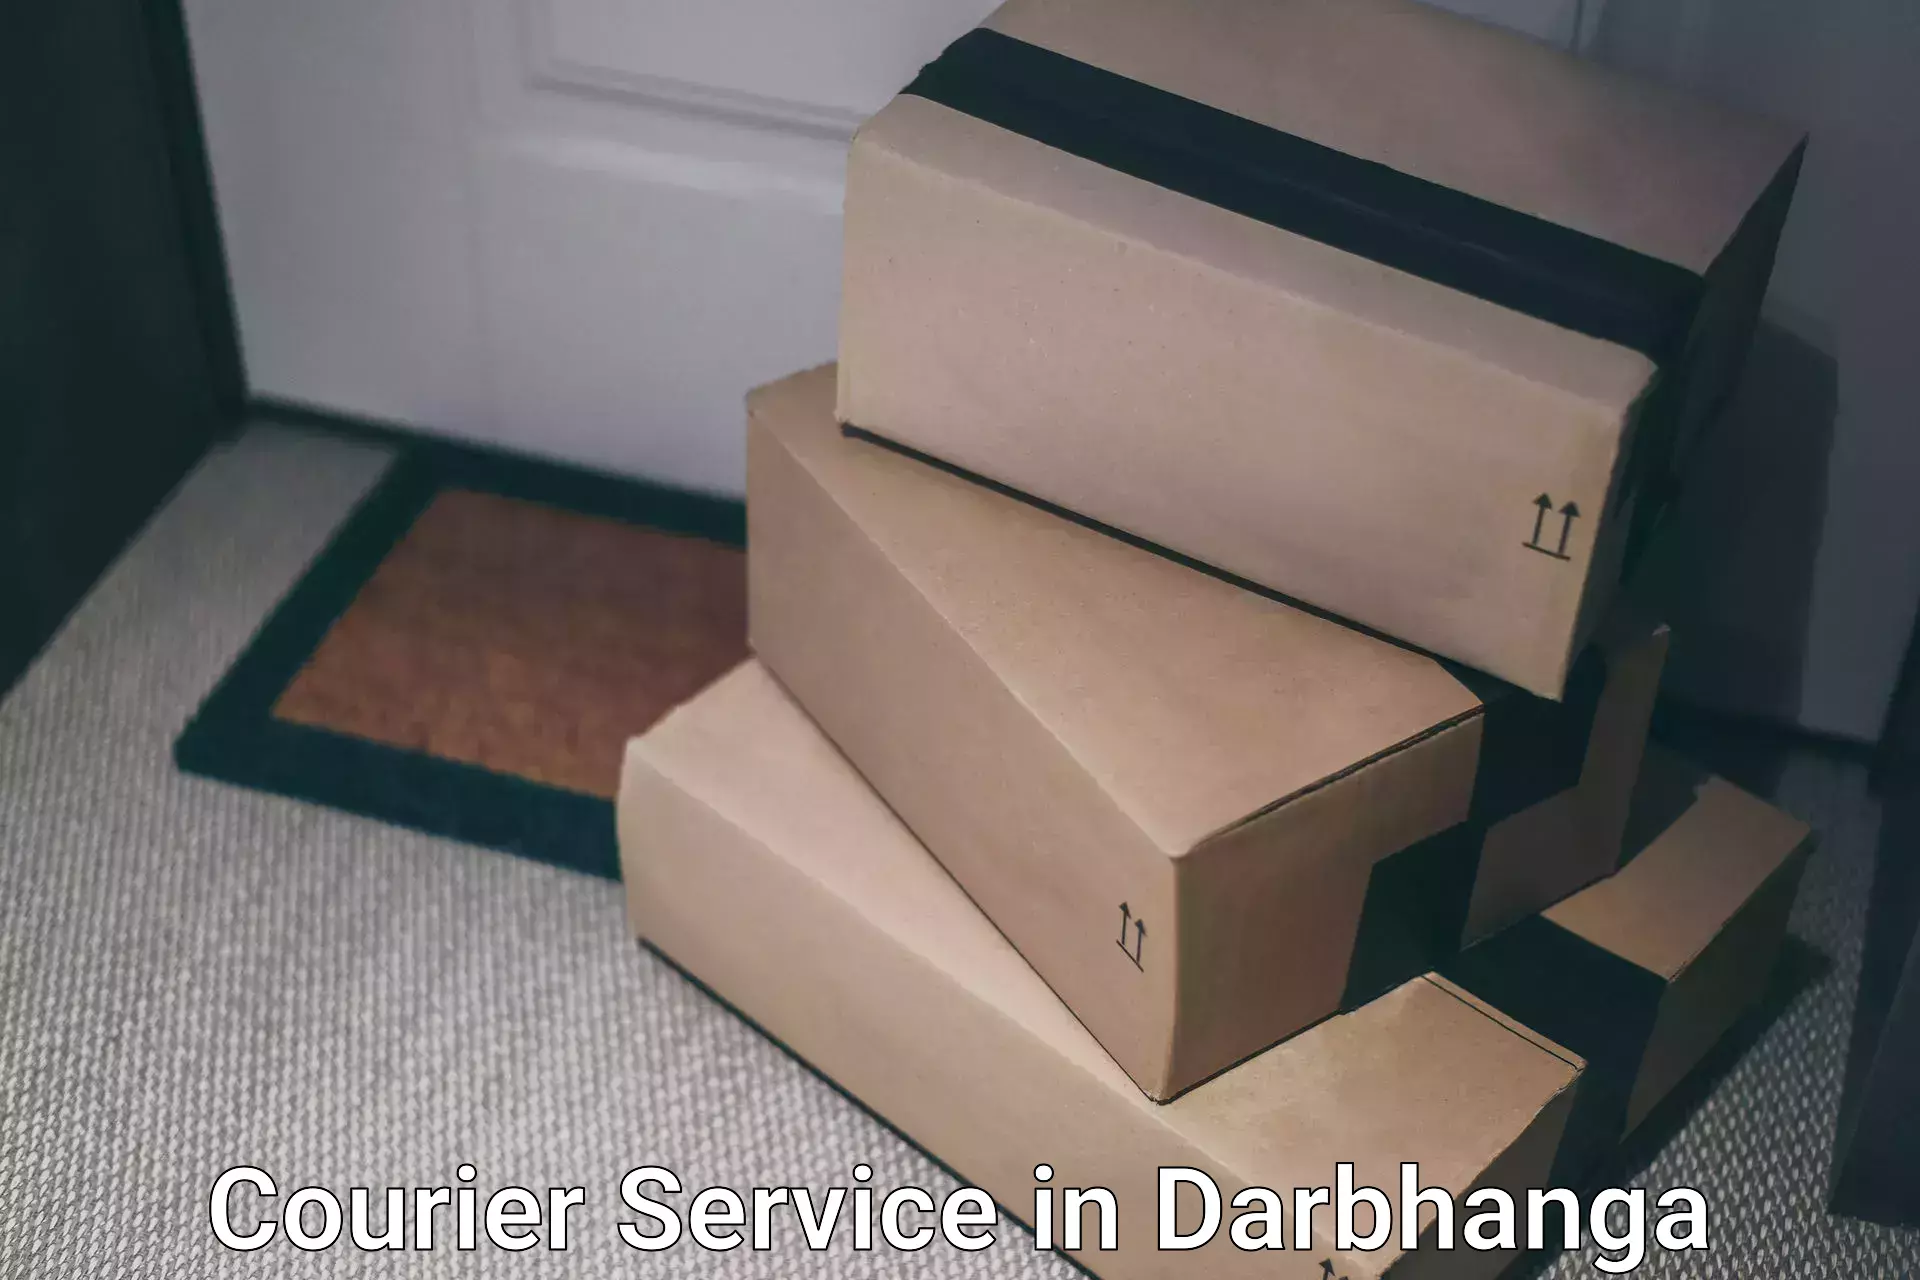 Postal and courier services in Darbhanga